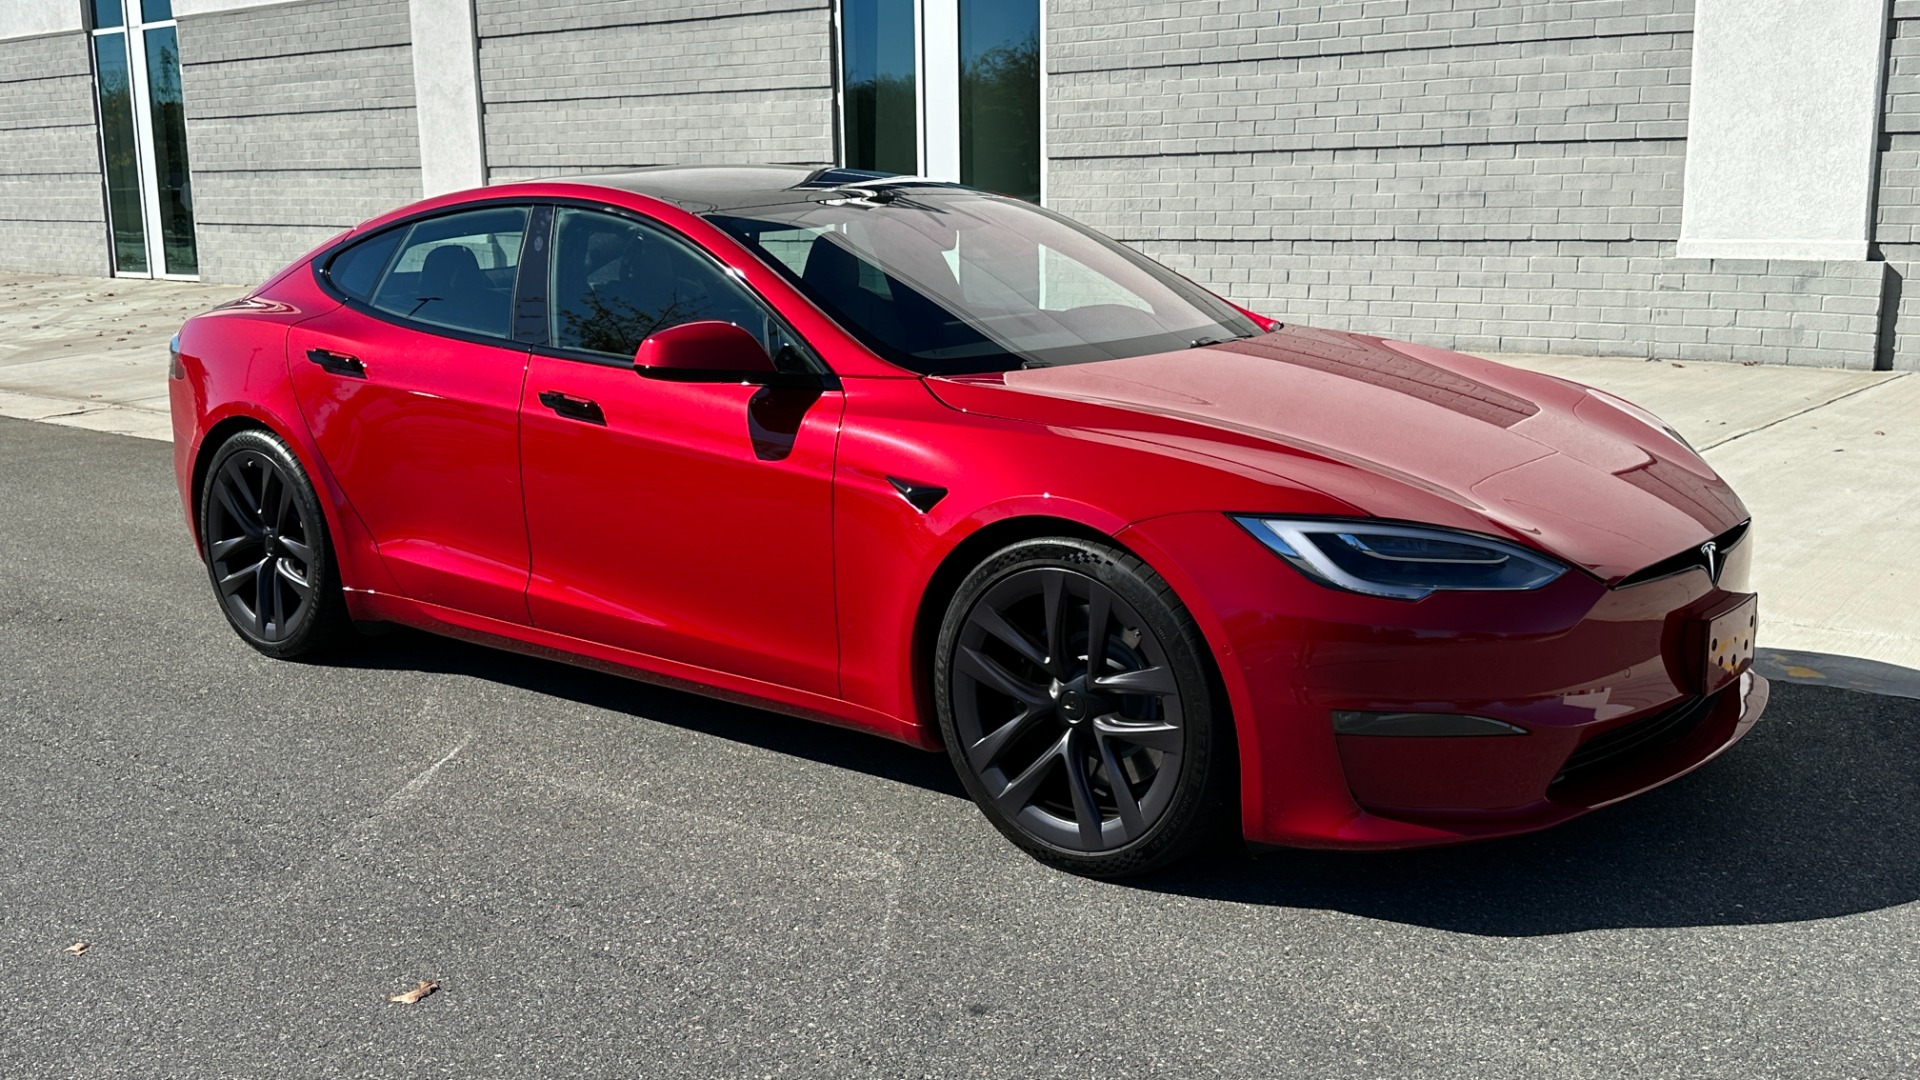 Used 2021 Tesla Model S PLAID / FULL SELF DRIVING / STANDARD CONNECTIVITY / CHARING CABLE / CARBON  for sale $117,995 at Formula Imports in Charlotte NC 28227 3